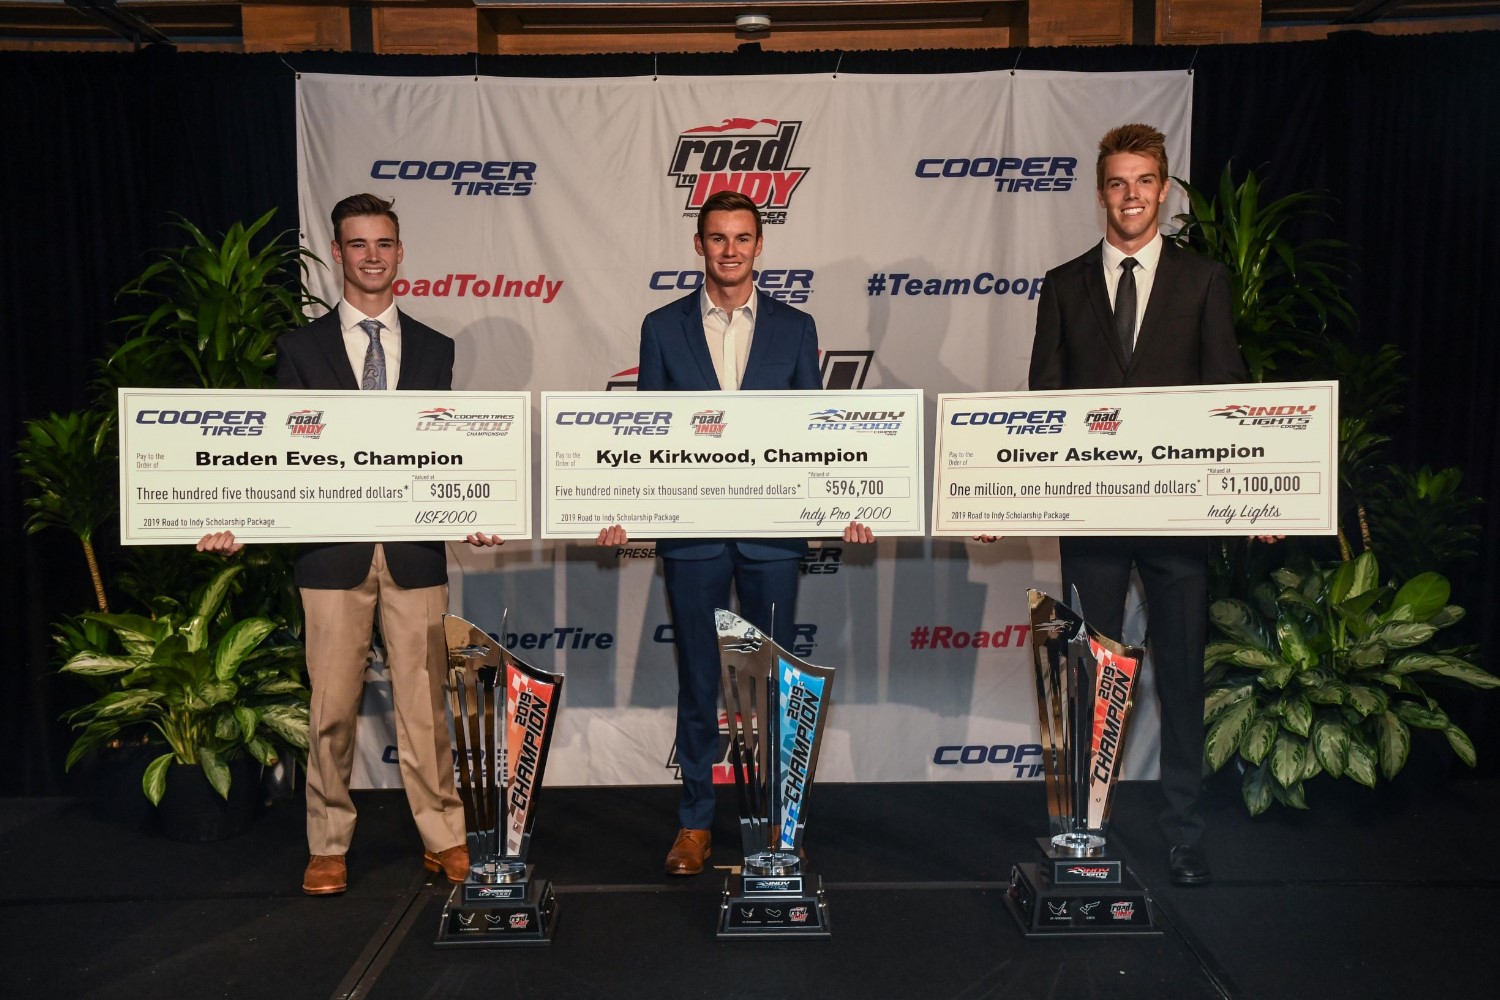 From left, Braden Eves (USF2000 Champion), Kyle Kirkwood (IP2000 Champion) and  Oliver Askew (Indy Lights Champion)